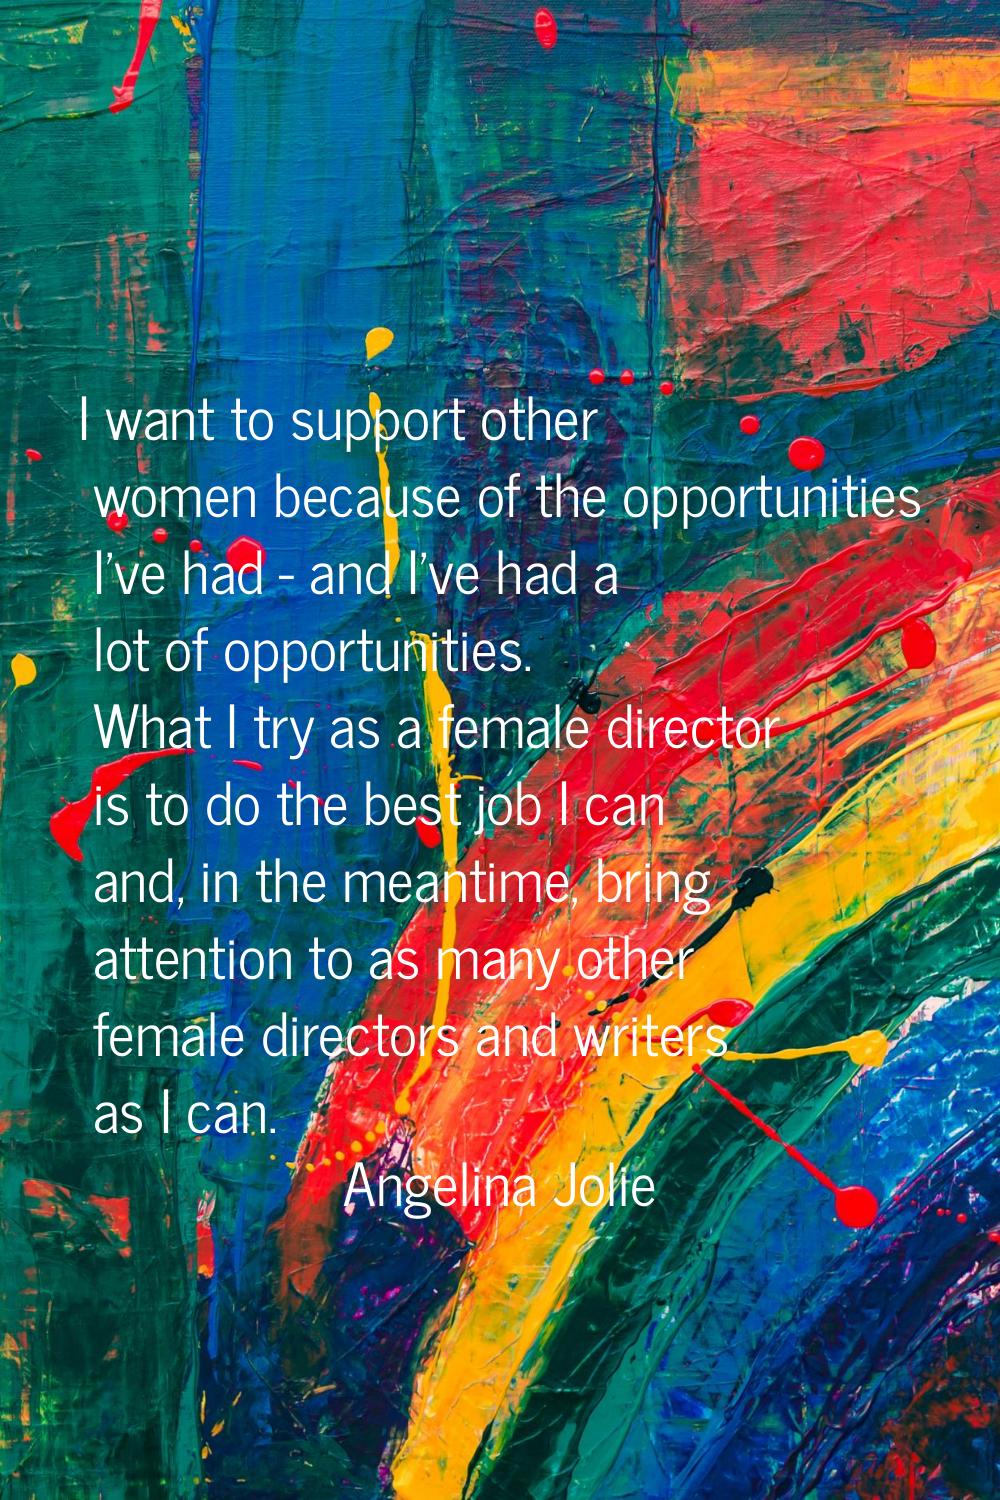 I want to support other women because of the opportunities I've had - and I've had a lot of opportu